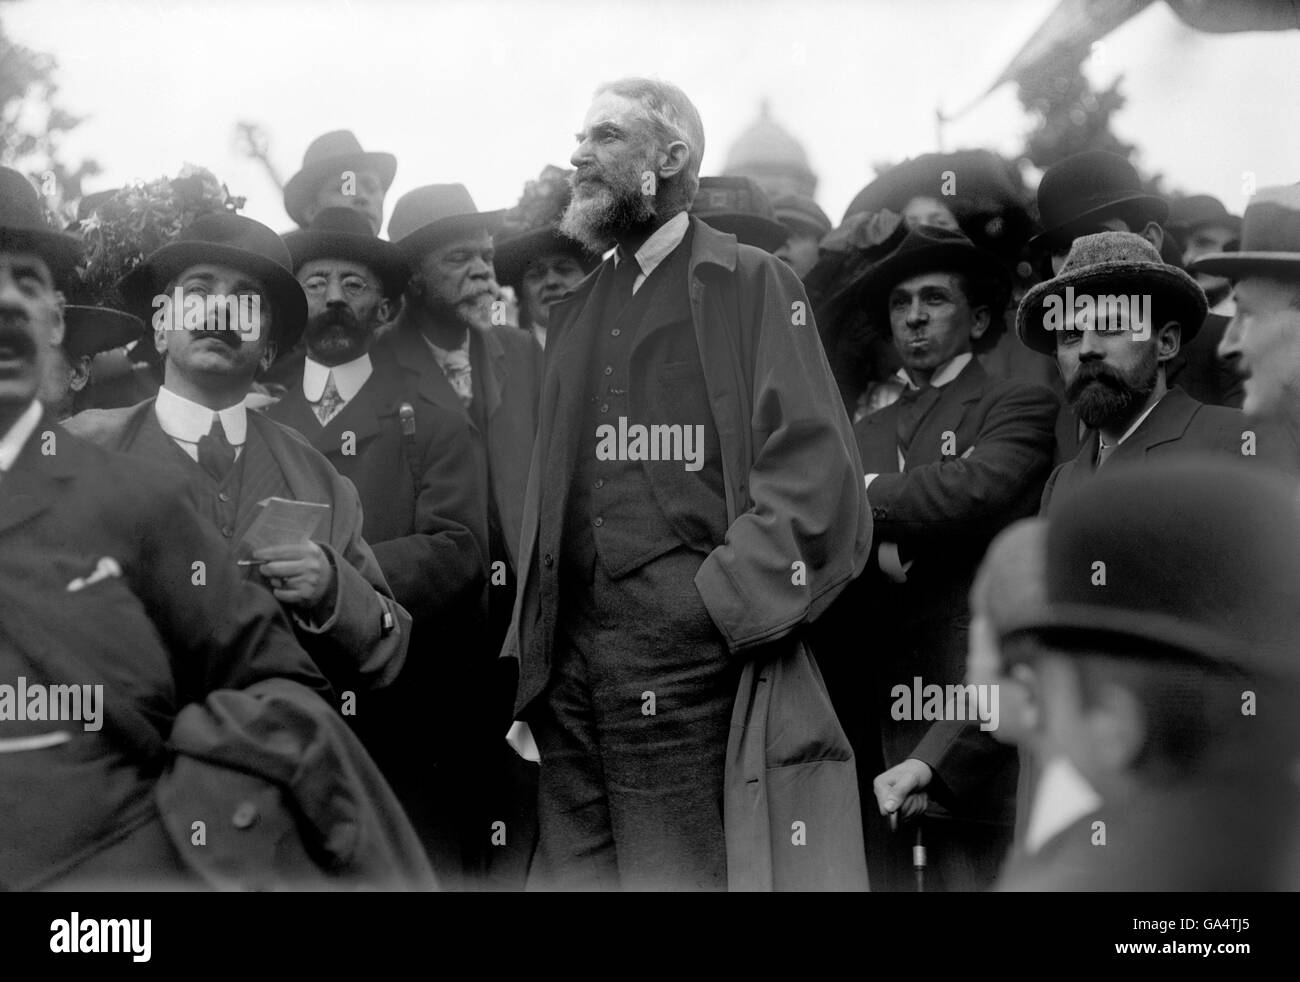 George Bernard Shaw attends a socialist rally as part of the Fabian Society of which he is a founding member. Stock Photo